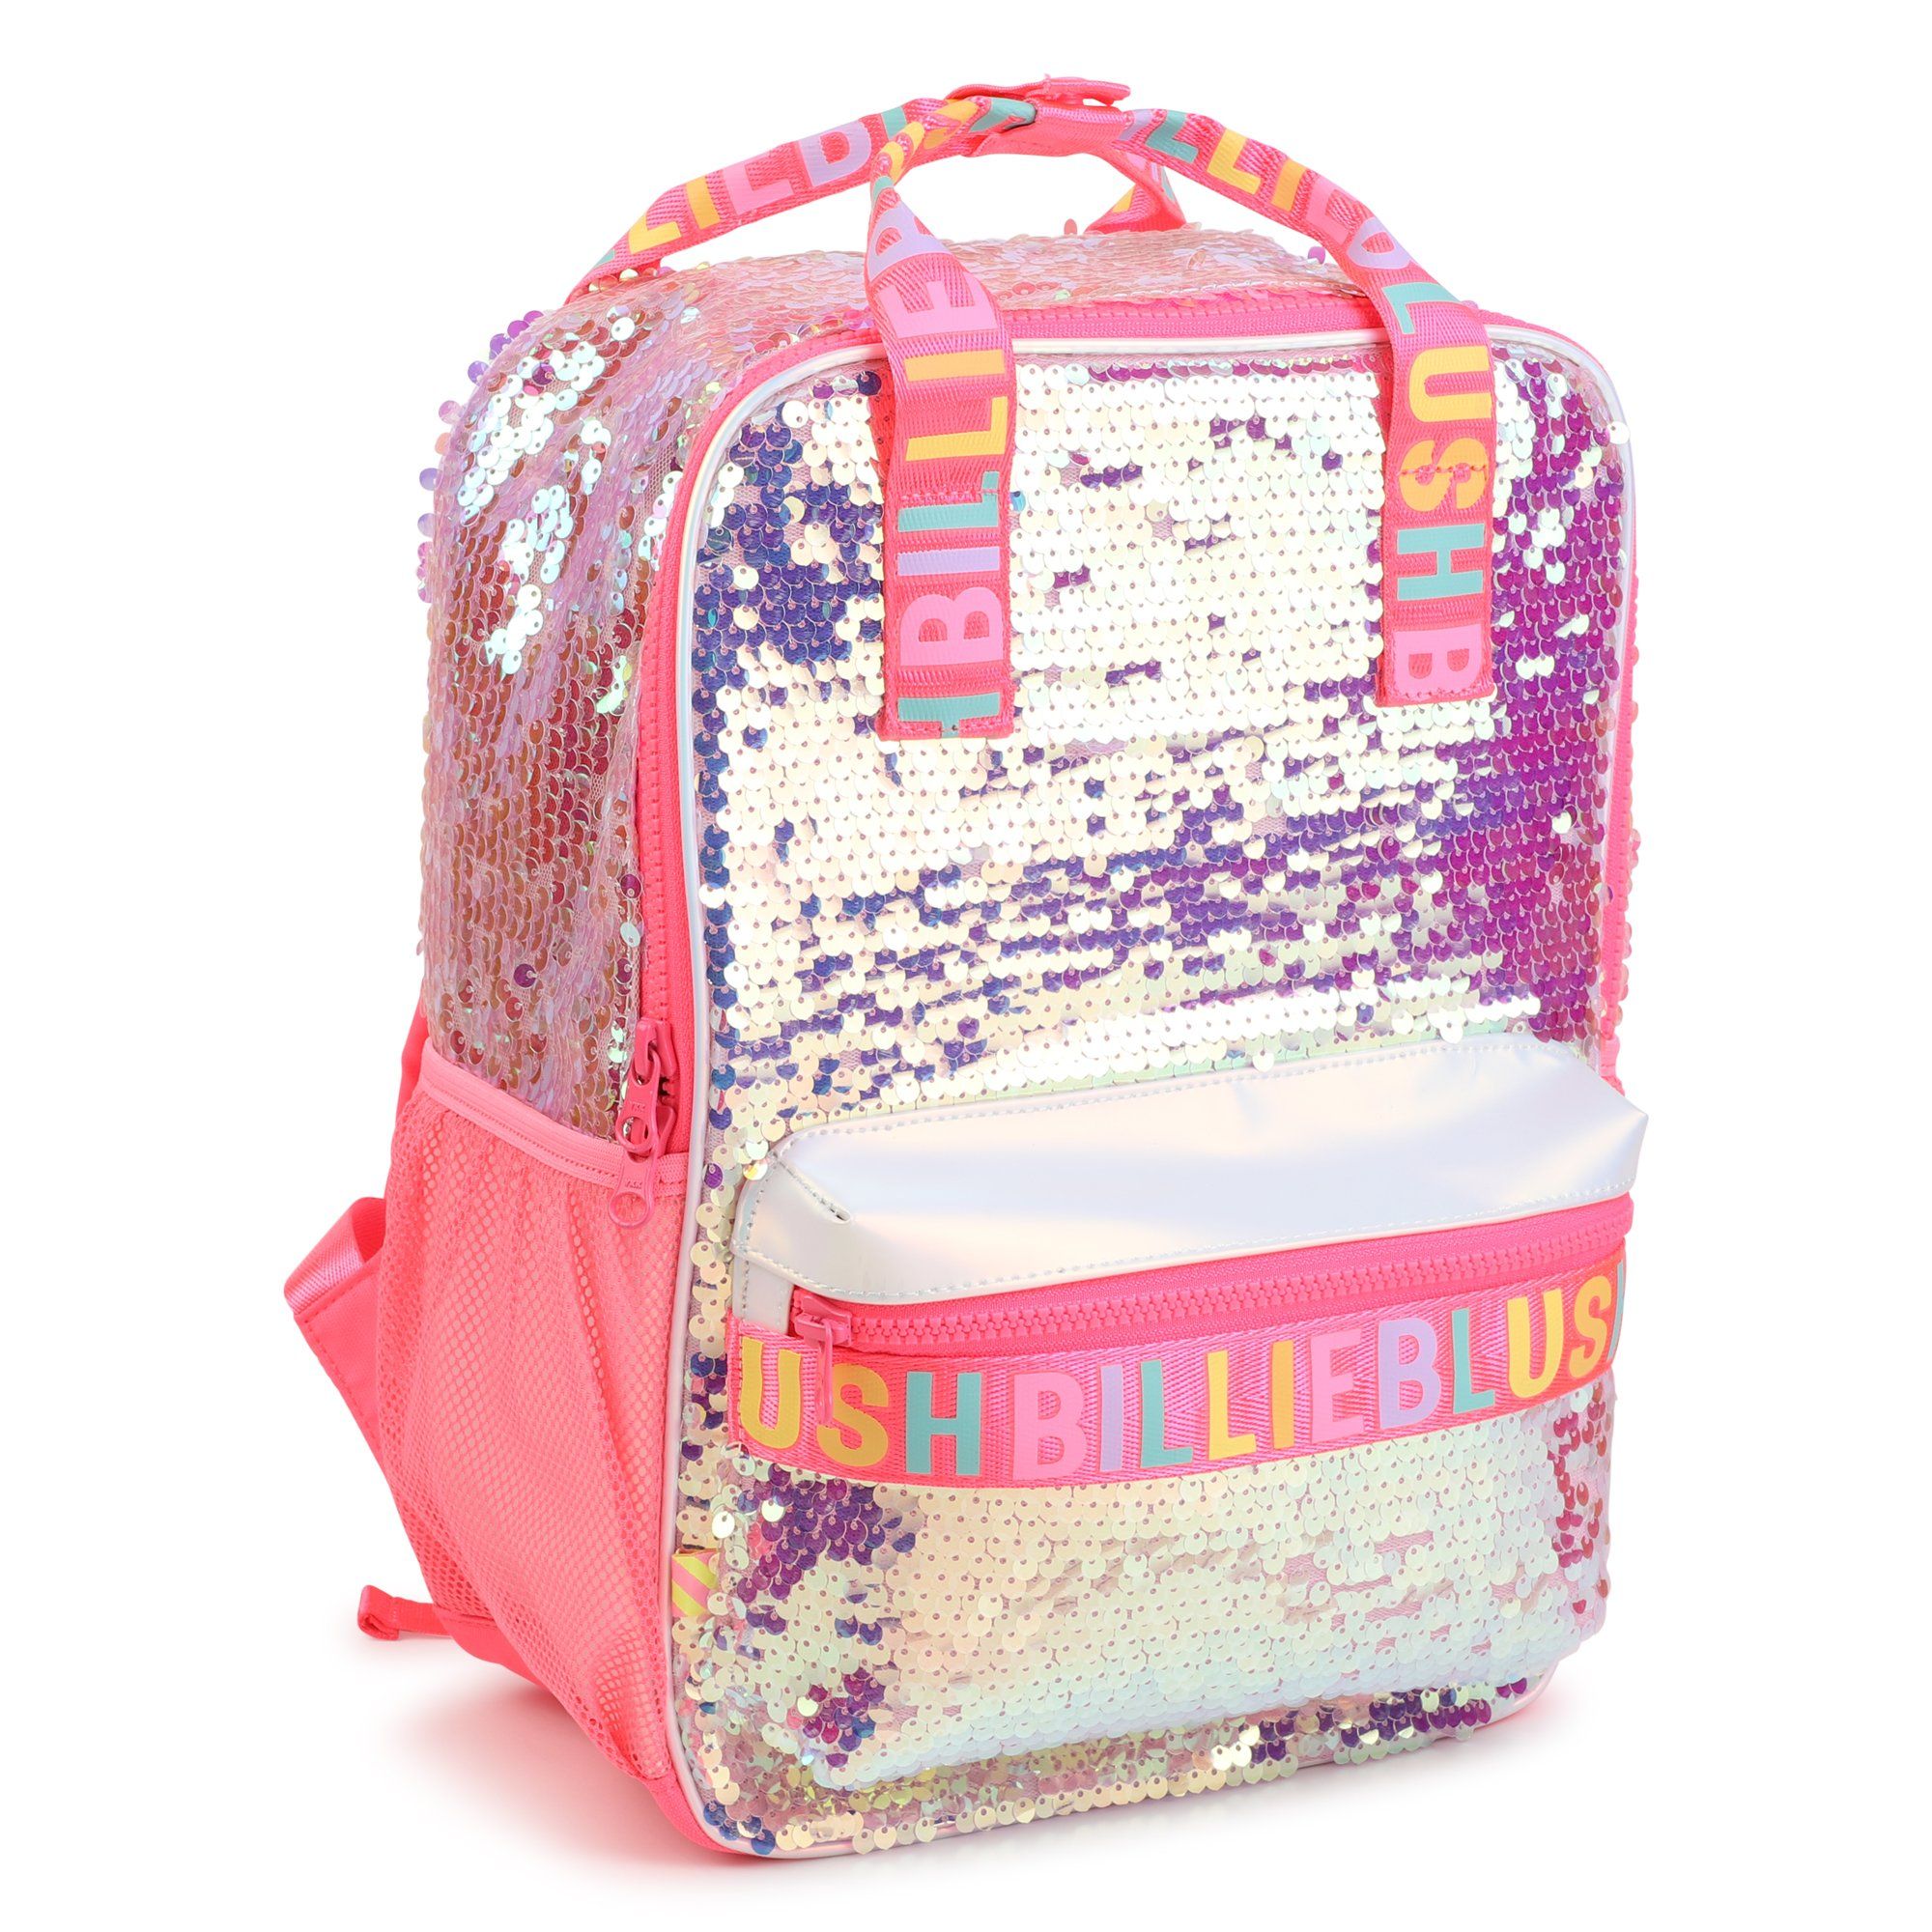 Shiny sequin backpack